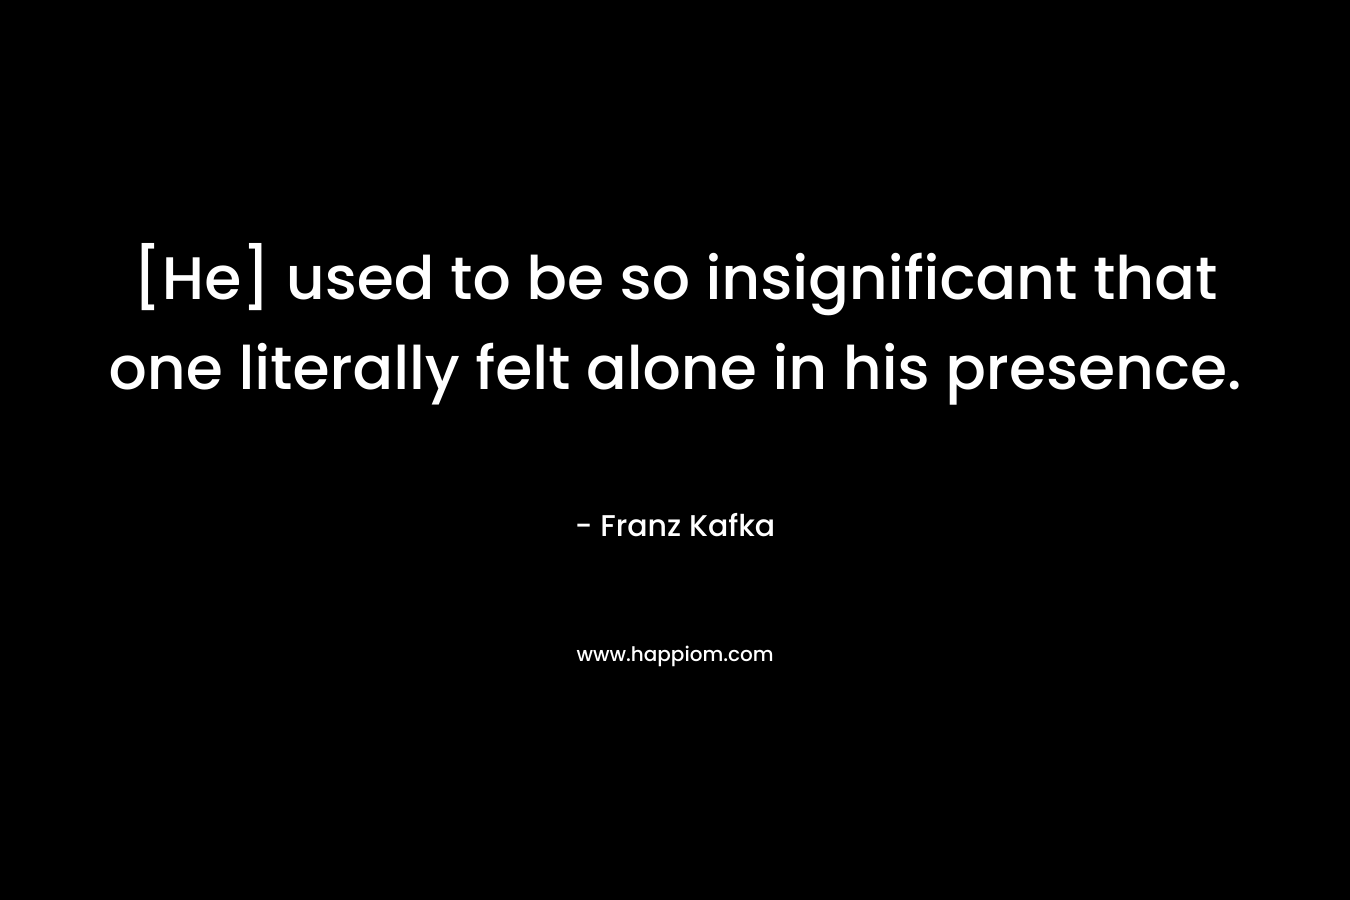 [He] used to be so insignificant that one literally felt alone in his presence. – Franz Kafka